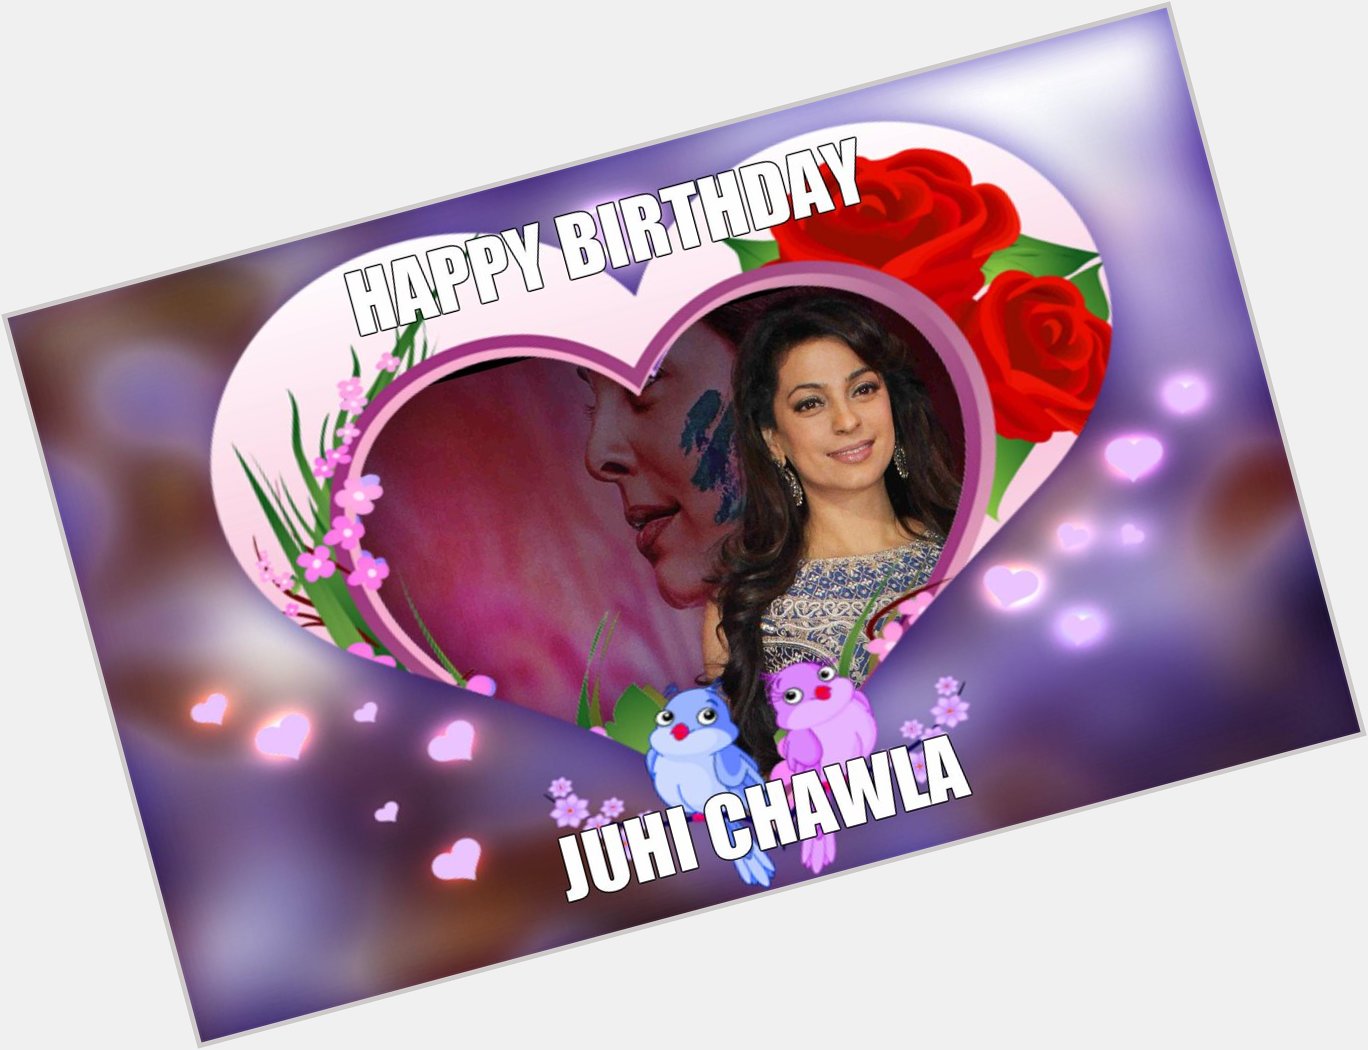  Happy Birthday 2 one of the greatest icons of the Indian Cinema-the one and only, JUHI CHAWLA! Have a gr8 1 